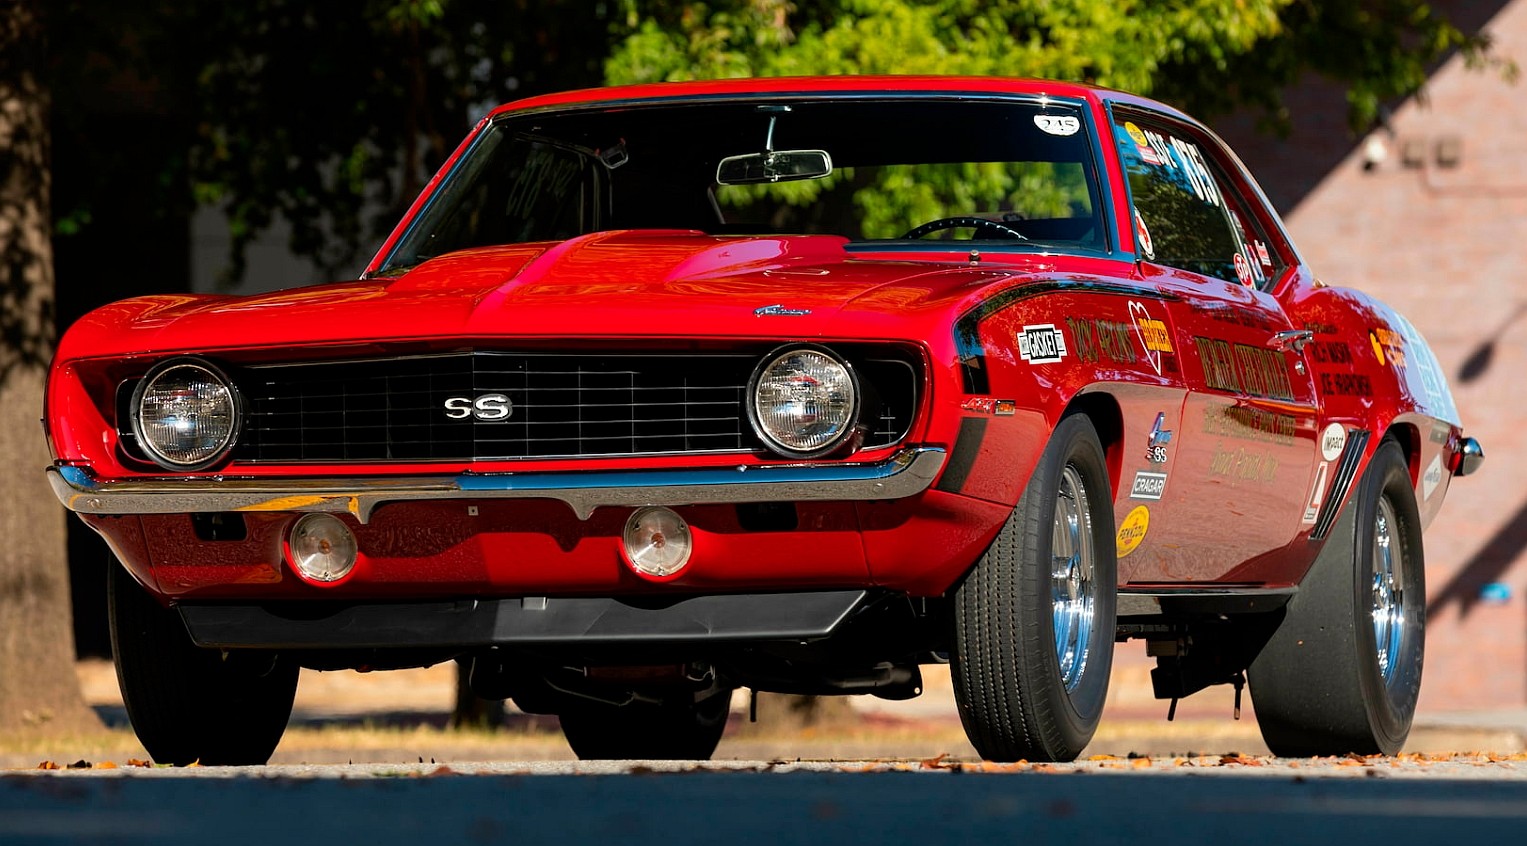 Worlds Rarest 1969 Chevrolet Camaro Is A Super Stock Racer With Only